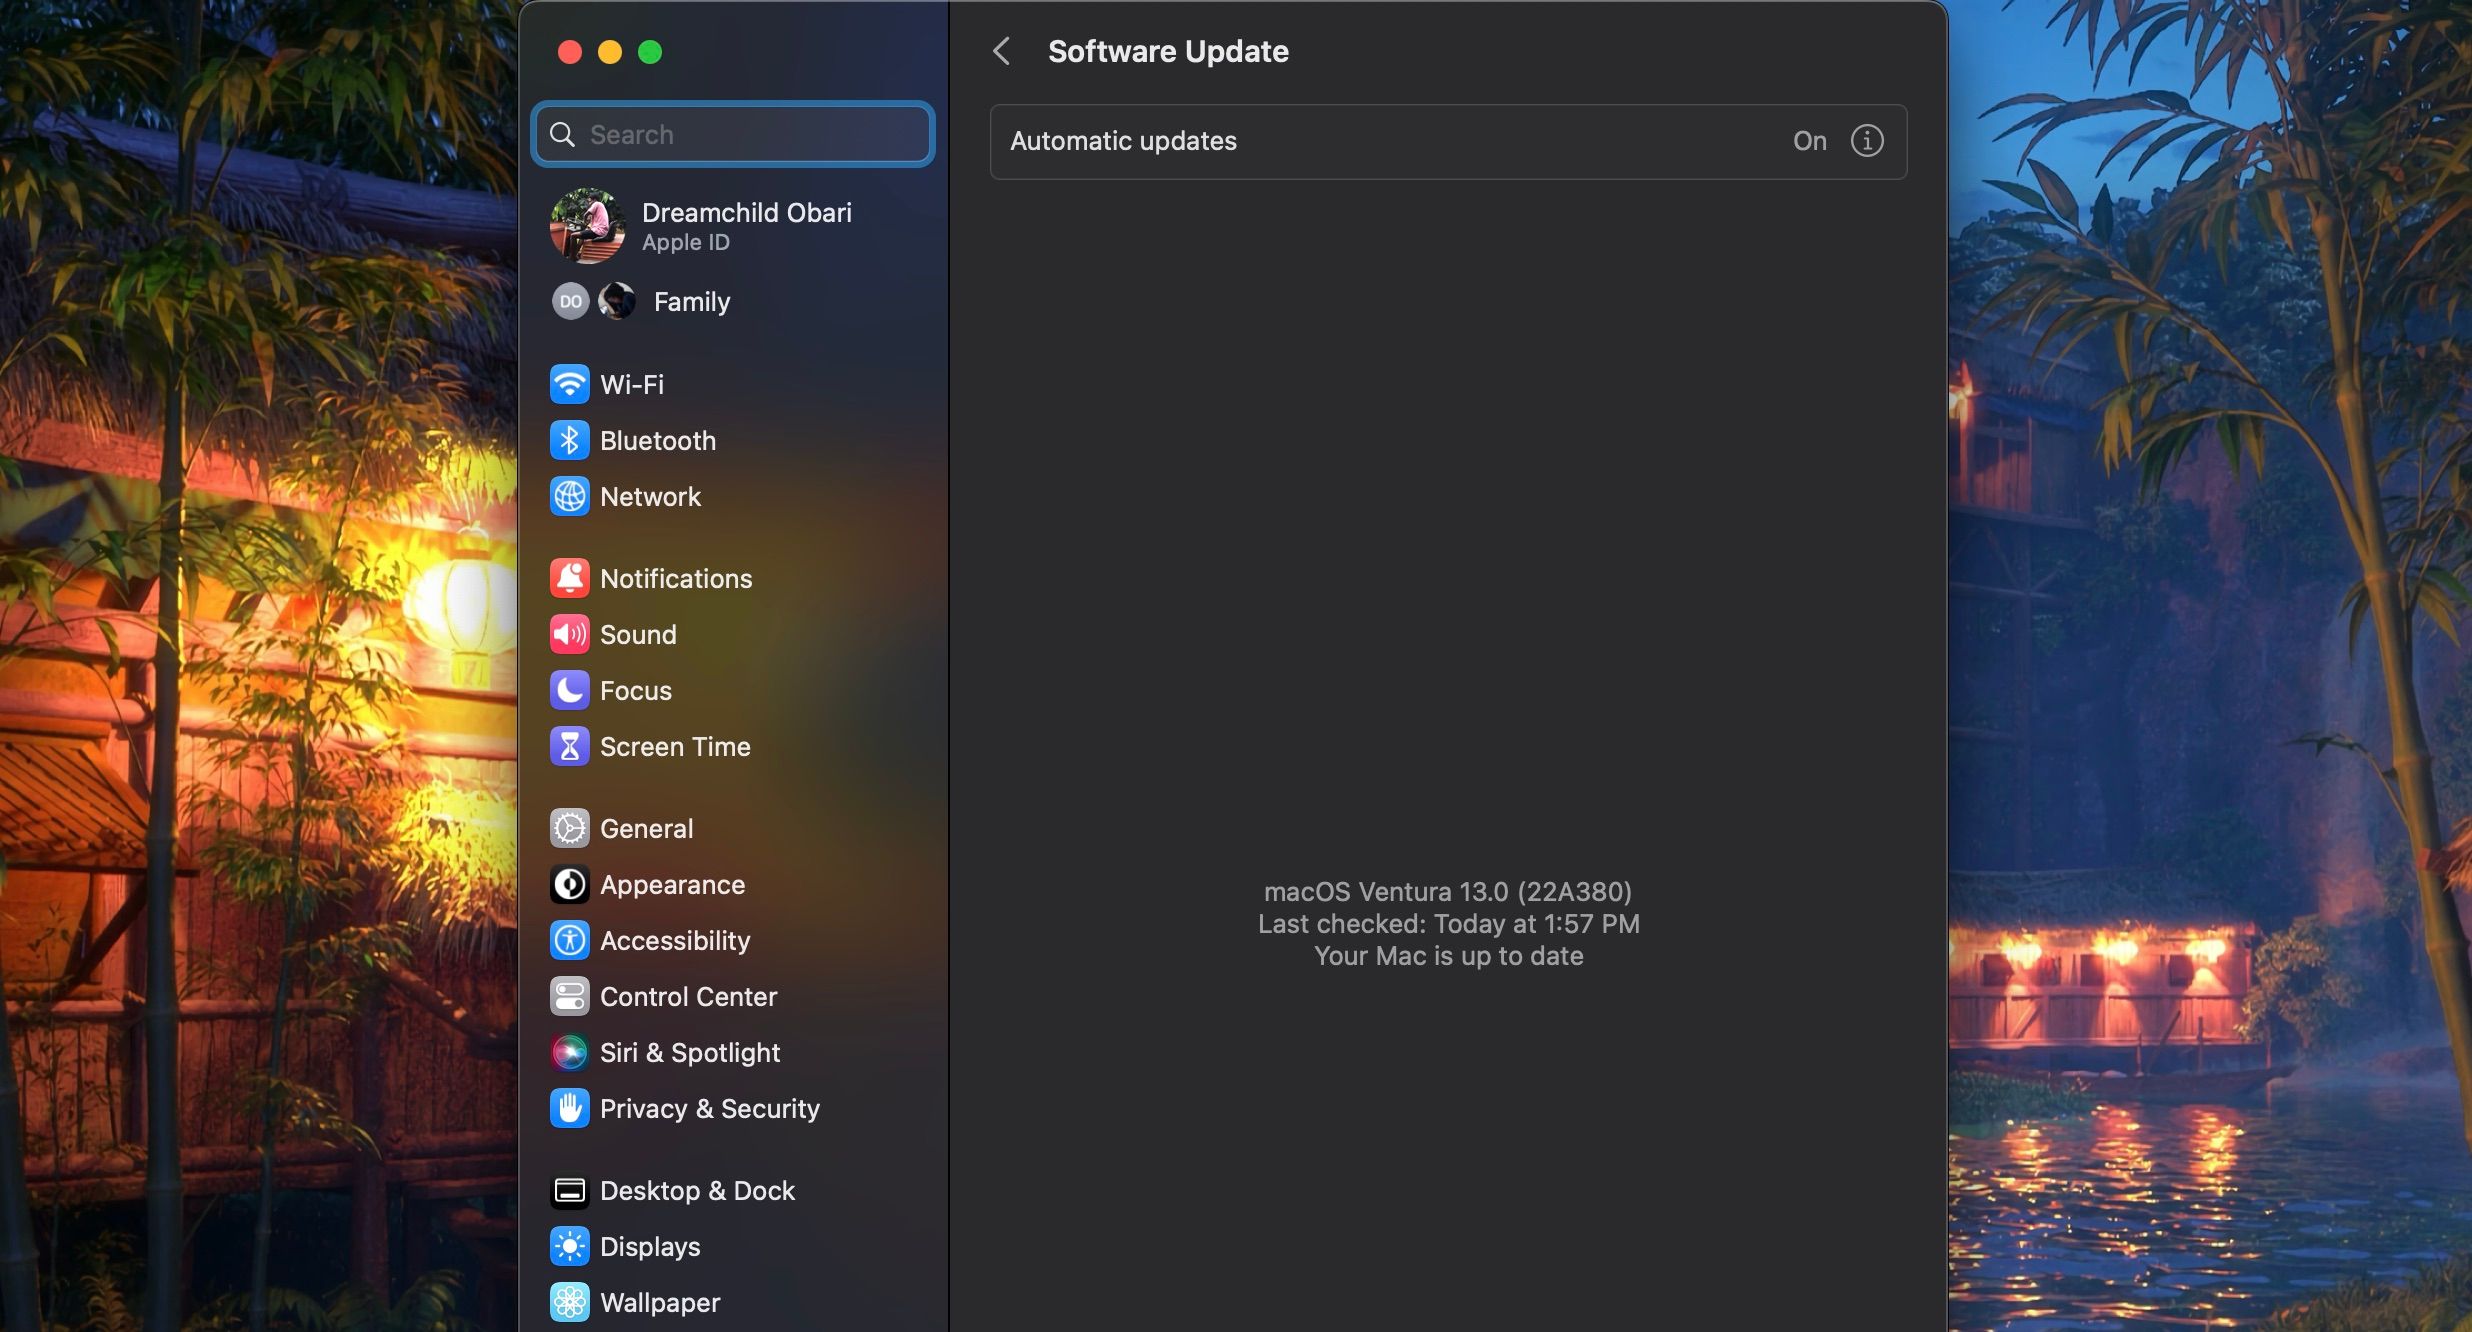 Software Update section of the System Settings